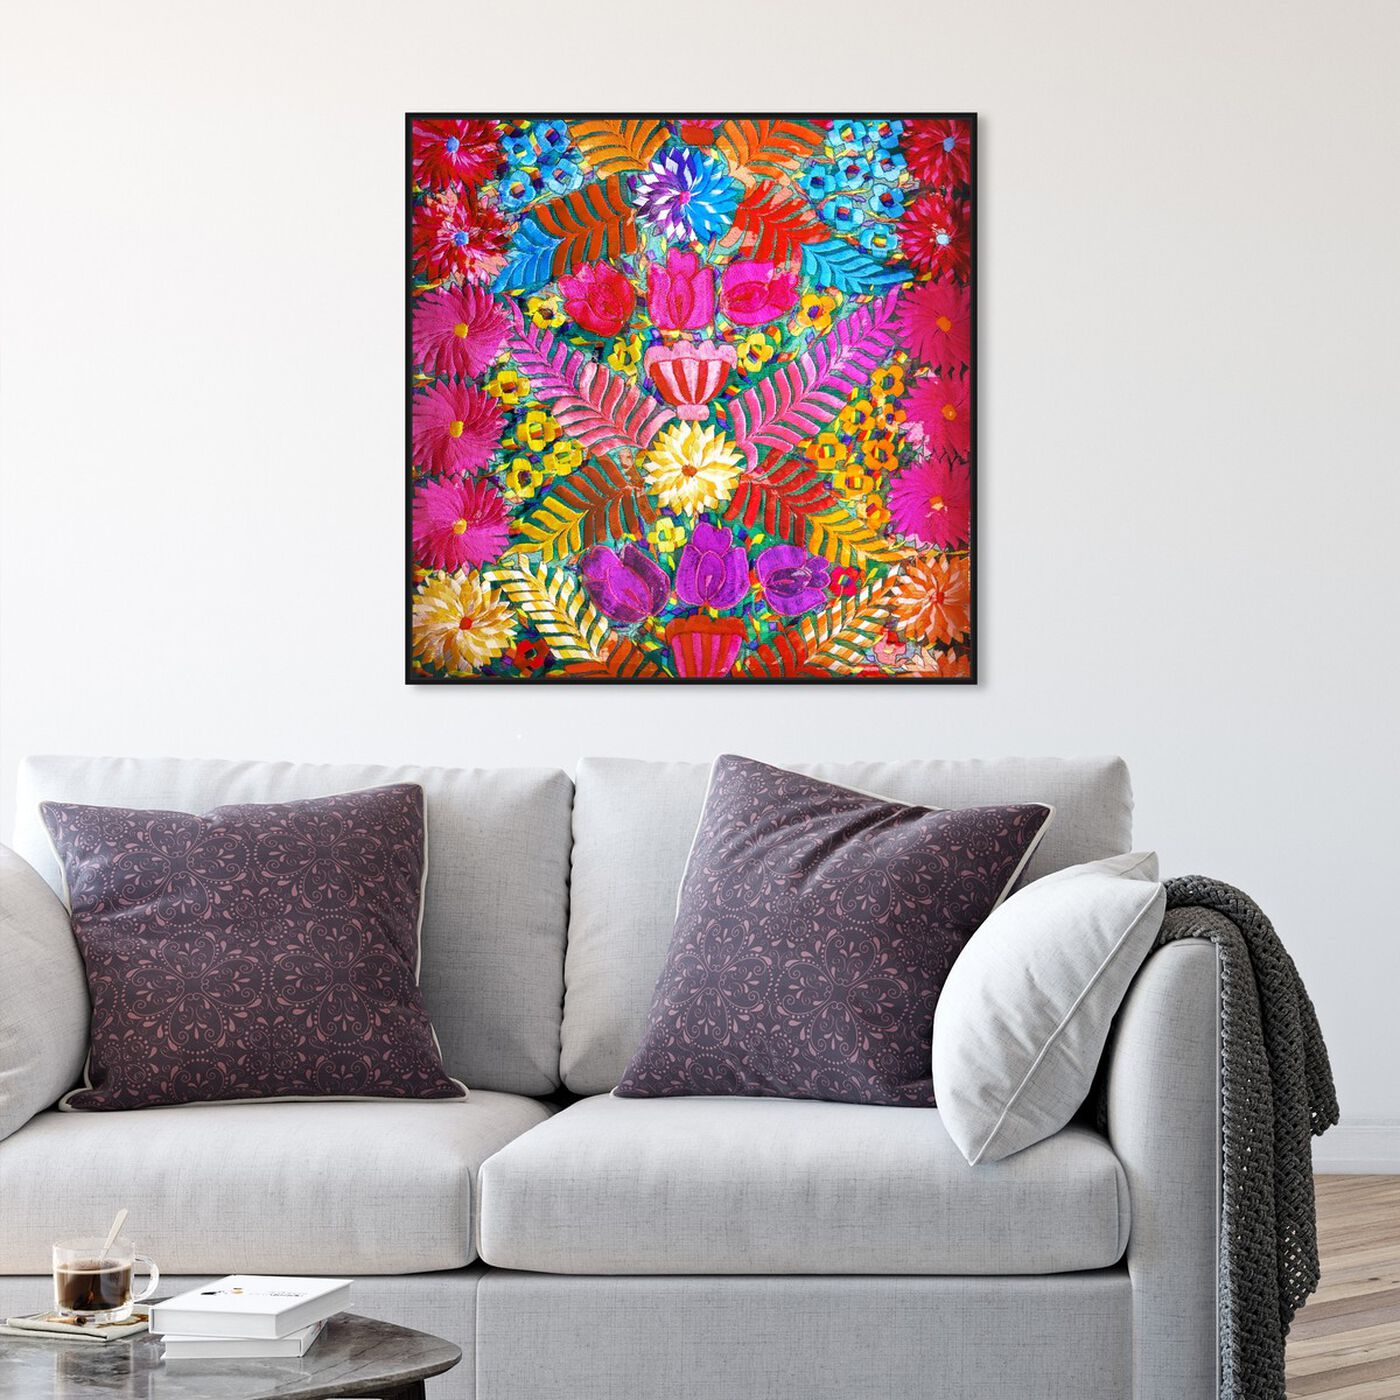 Hanging view of Prado Floral featuring floral and botanical and florals art.